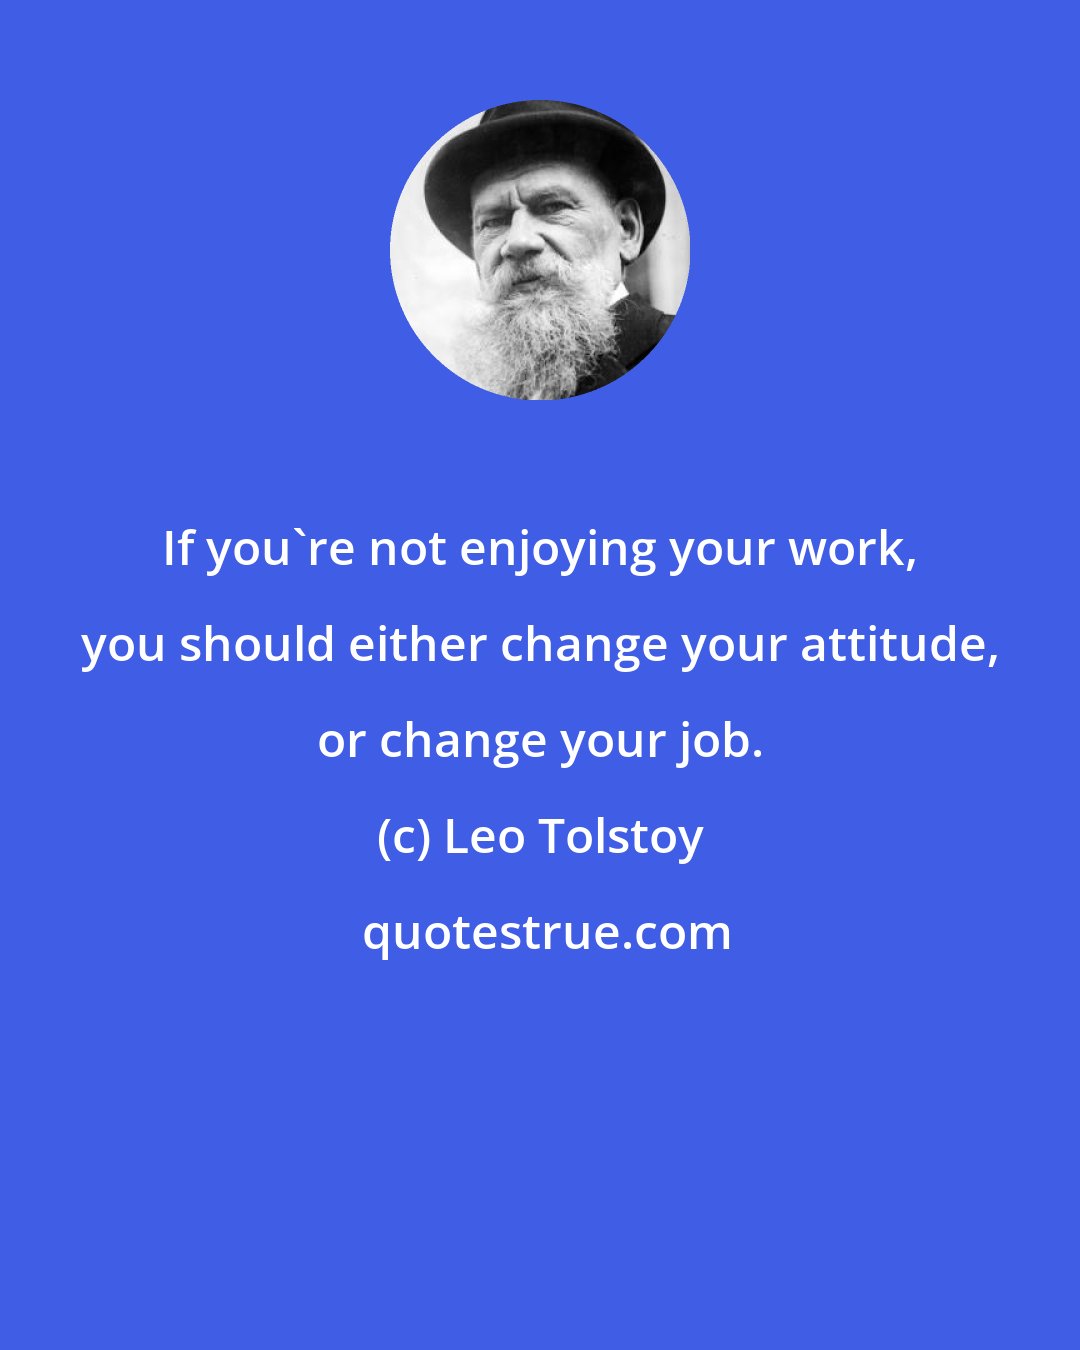 Leo Tolstoy: If you're not enjoying your work, you should either change your attitude, or change your job.